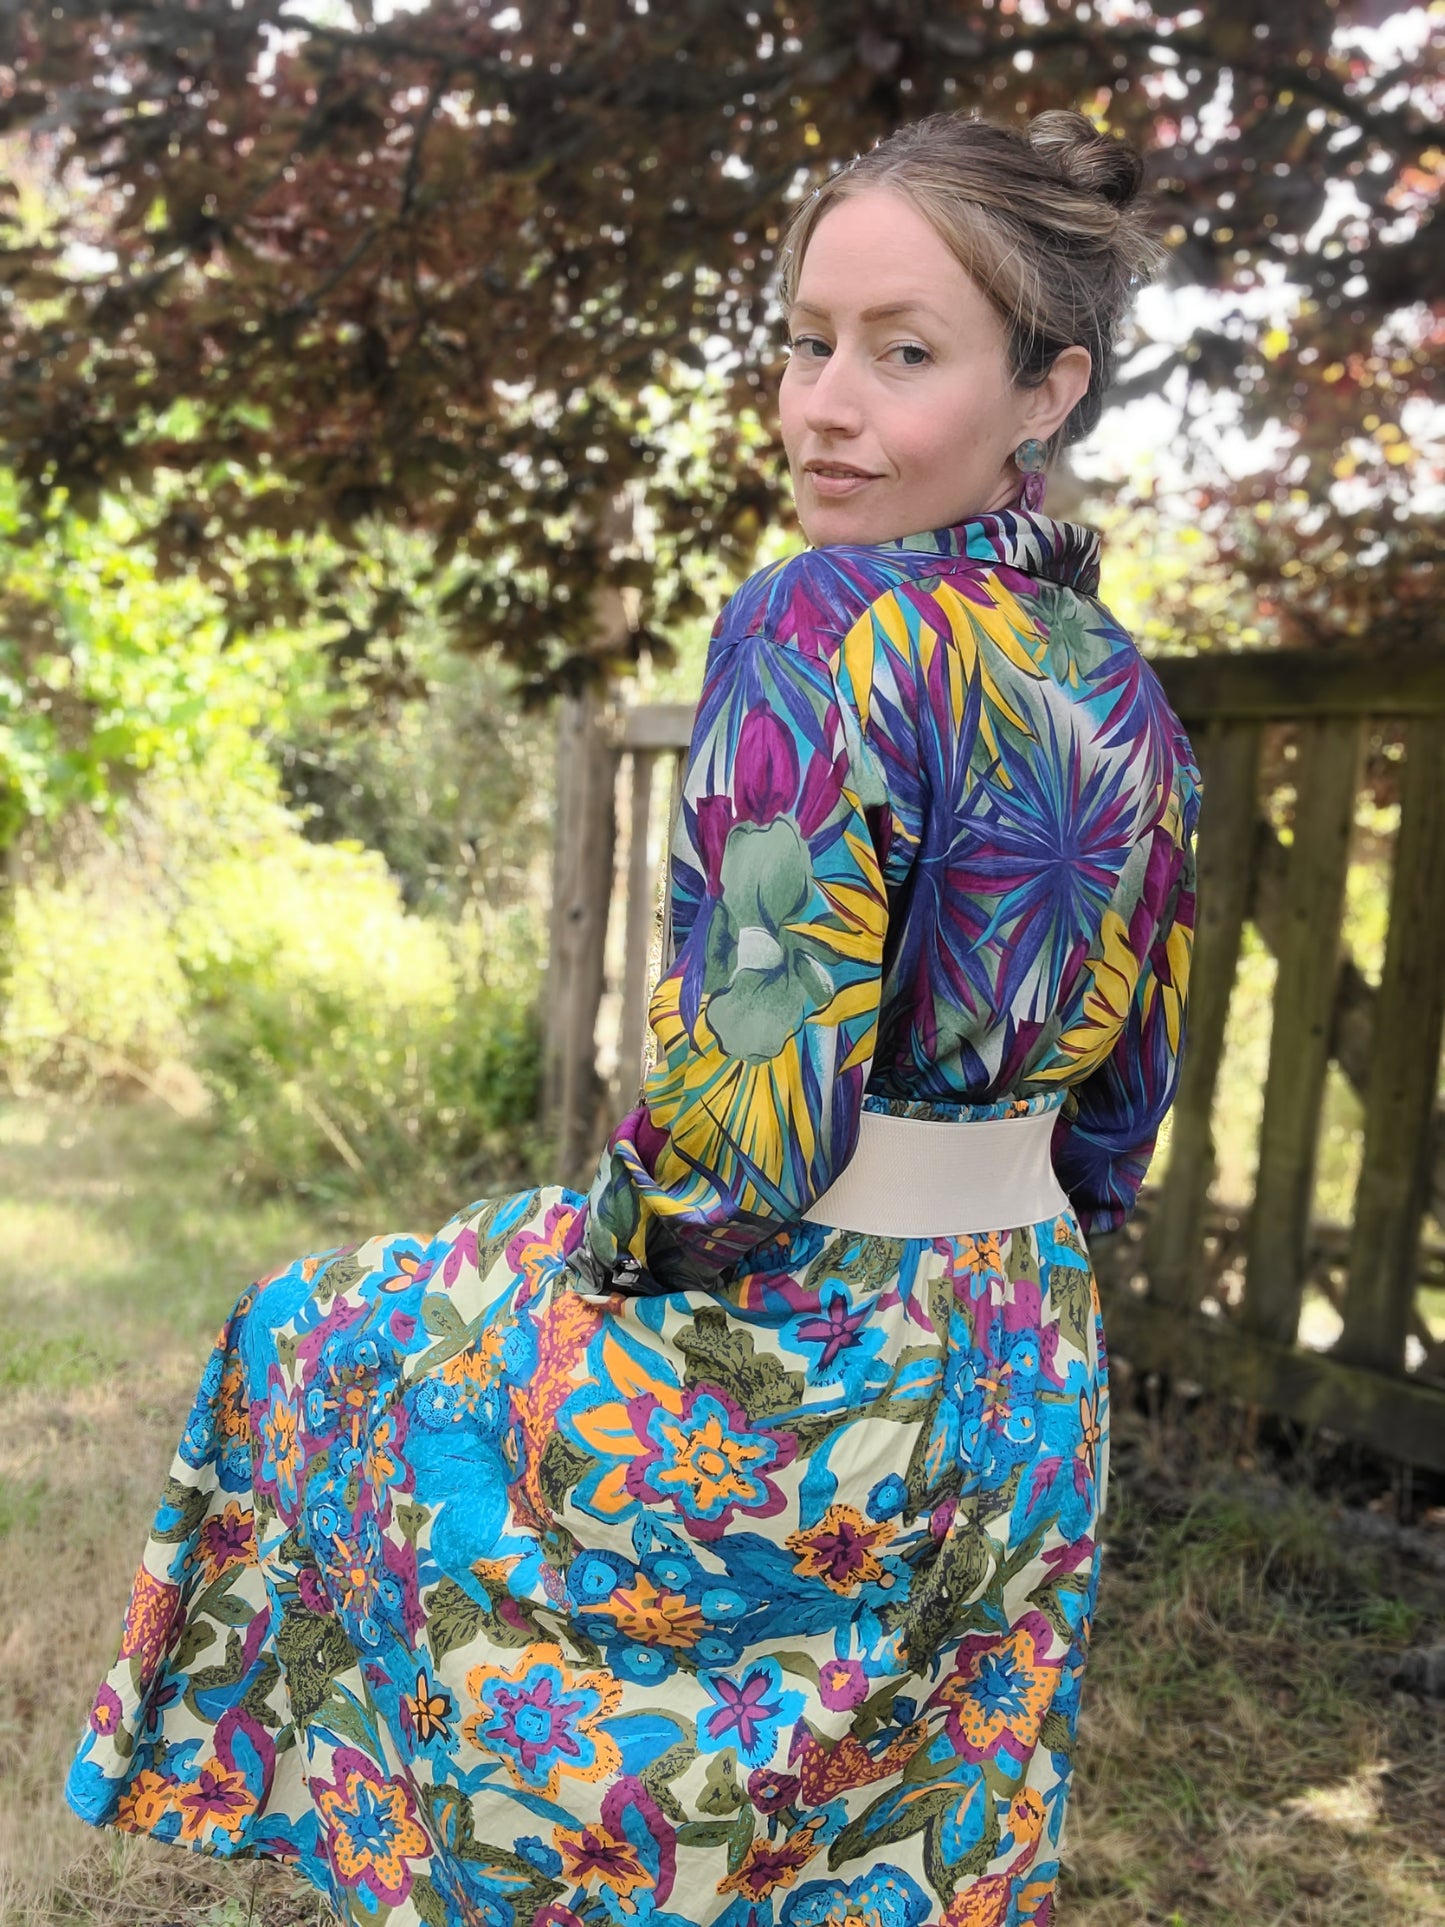 The House of Harlow 1960 Psychedelic Skirt L